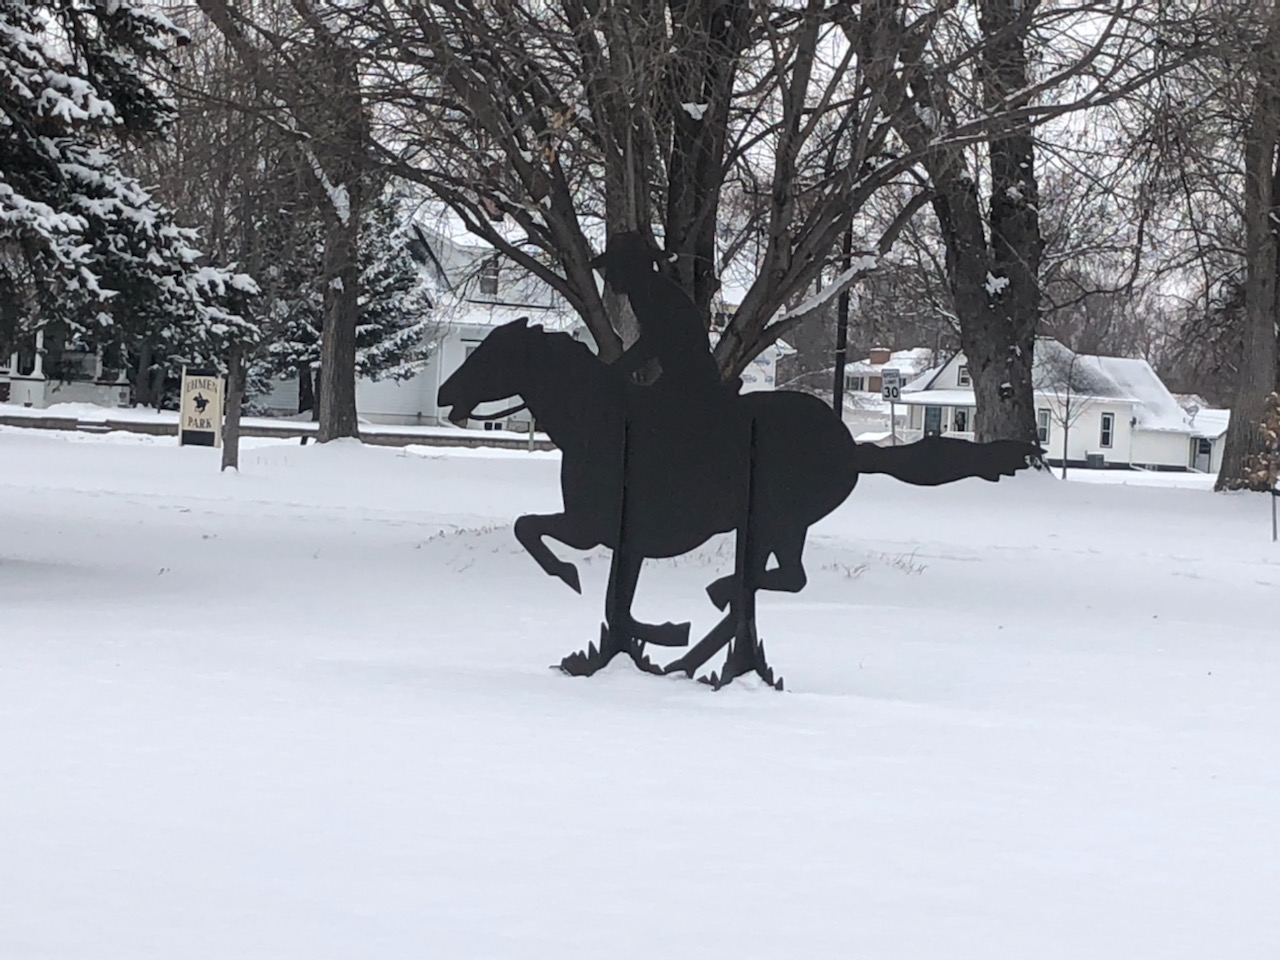 Metal cutout of a pony with a rider for the express